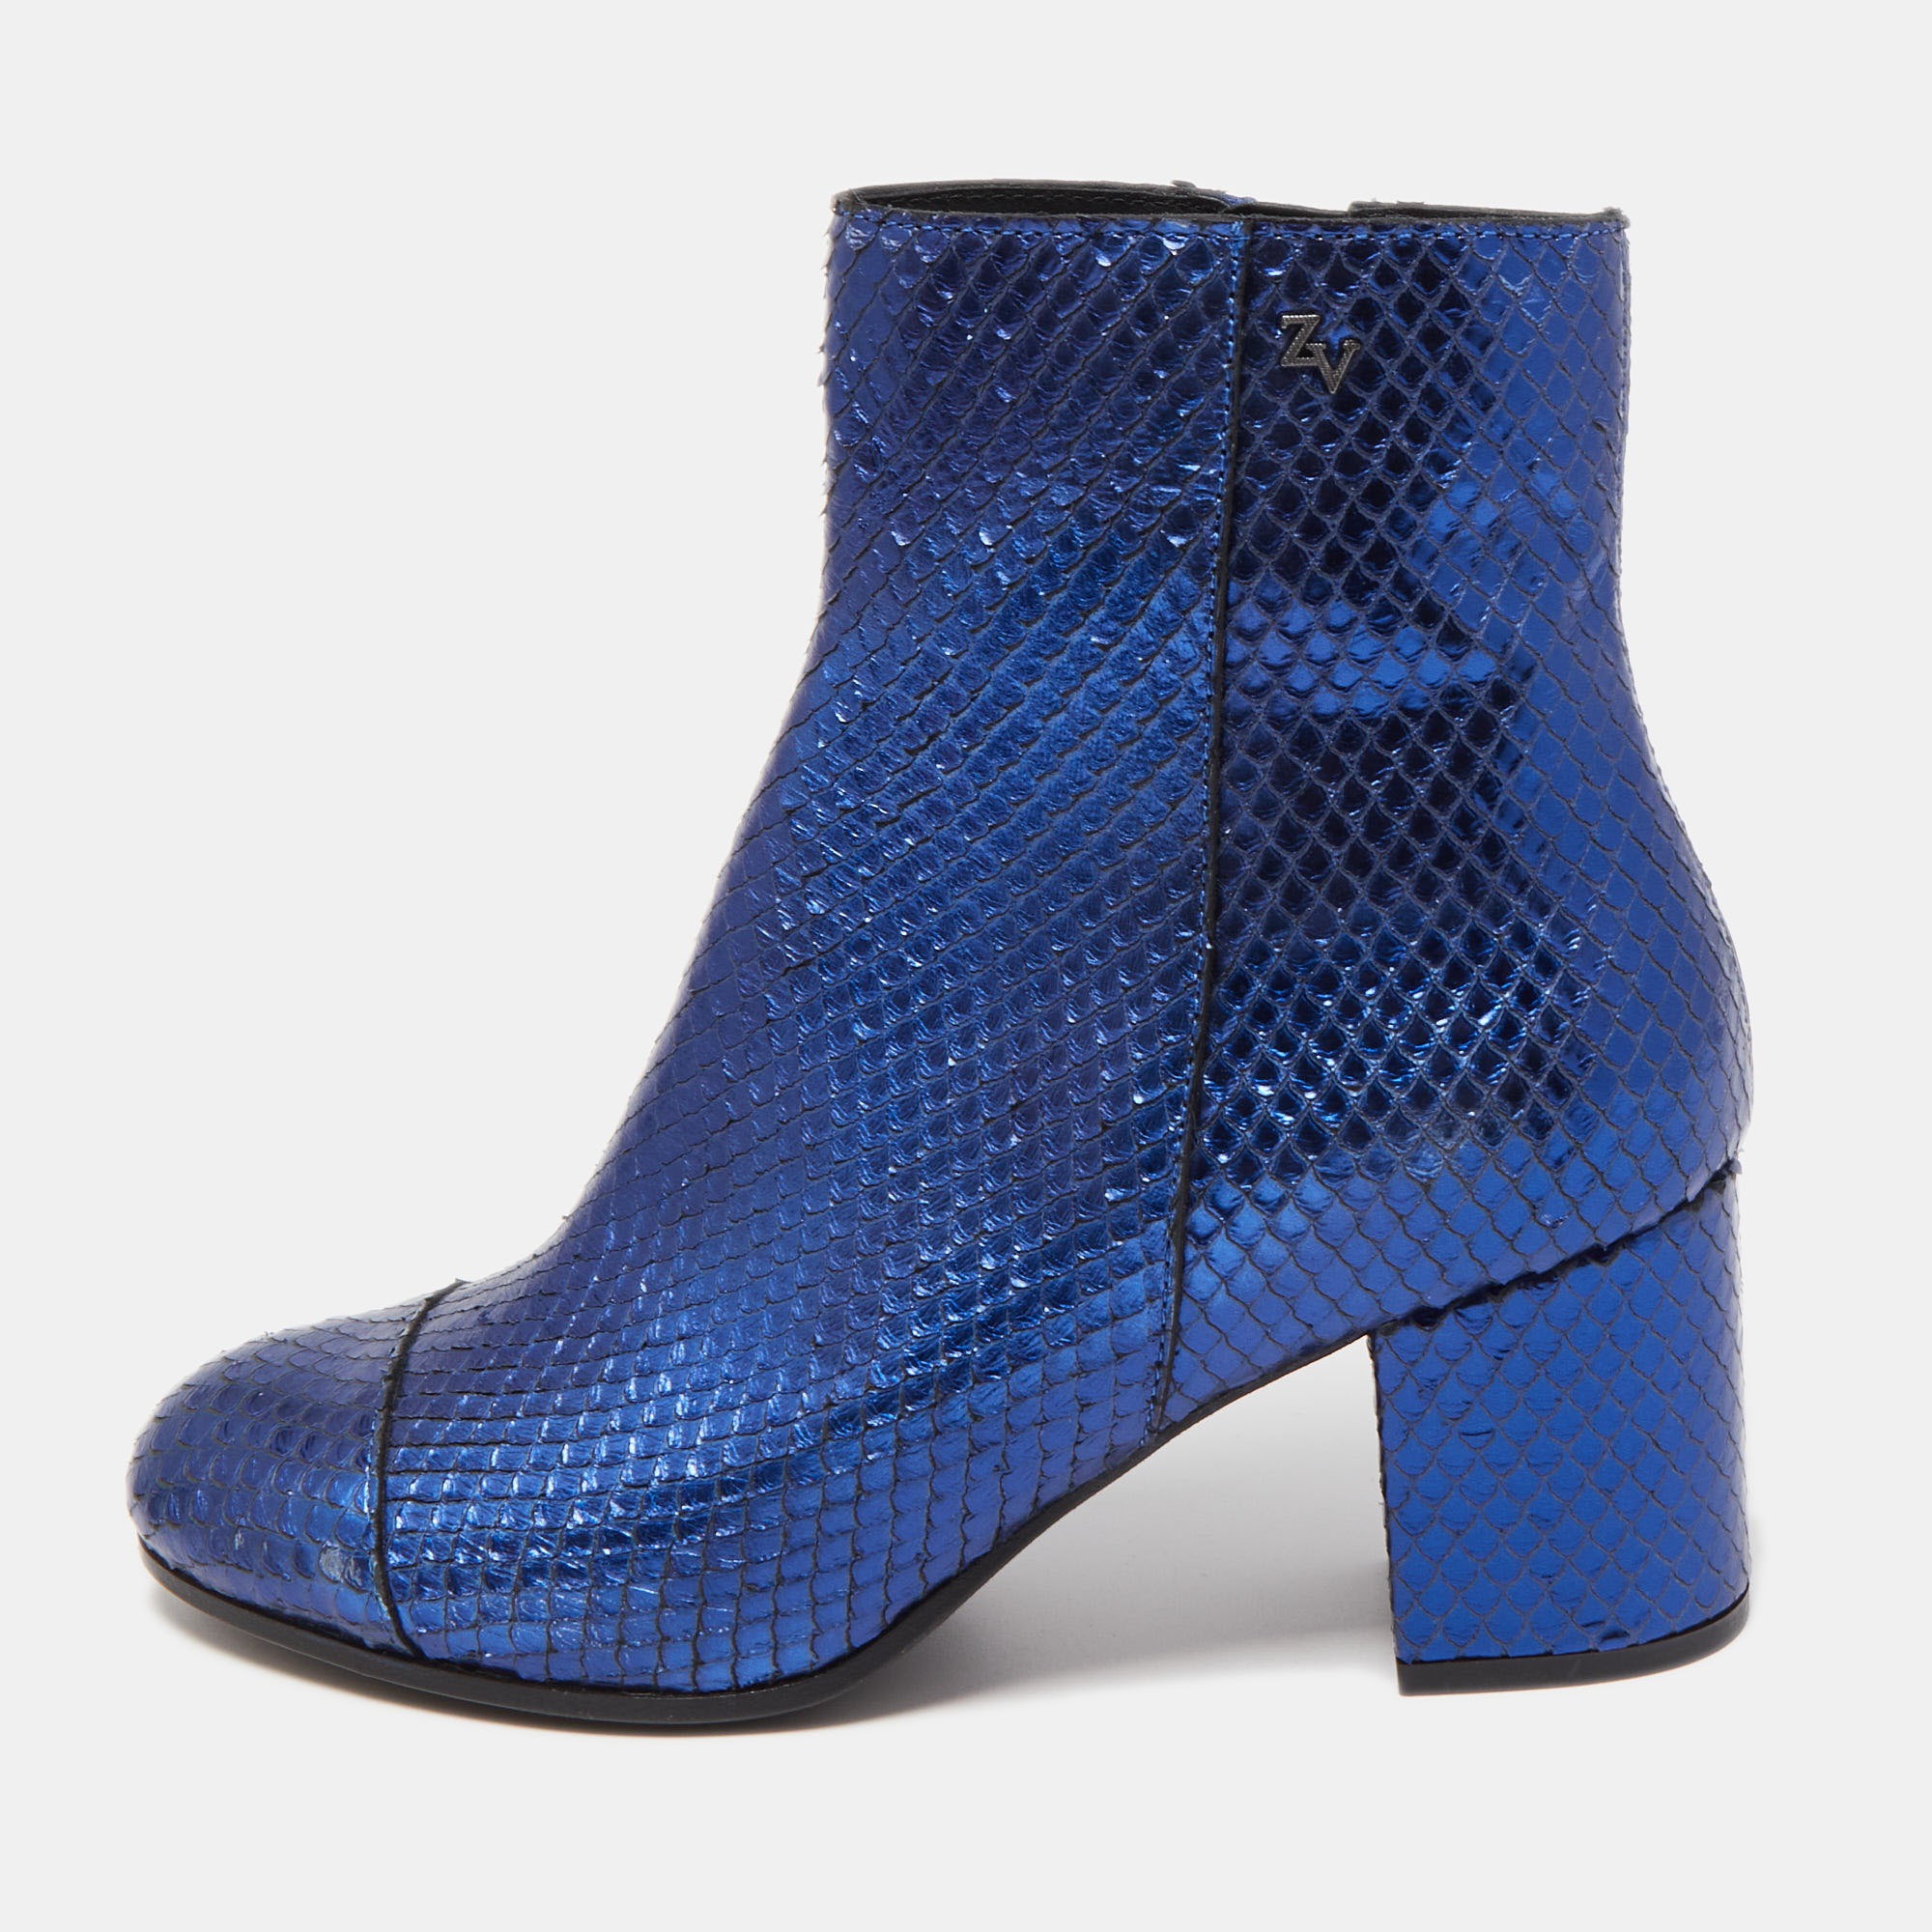 

Zadig & Voltaire Blue Python Embossed Leather Block Heel Ankle Booties Size